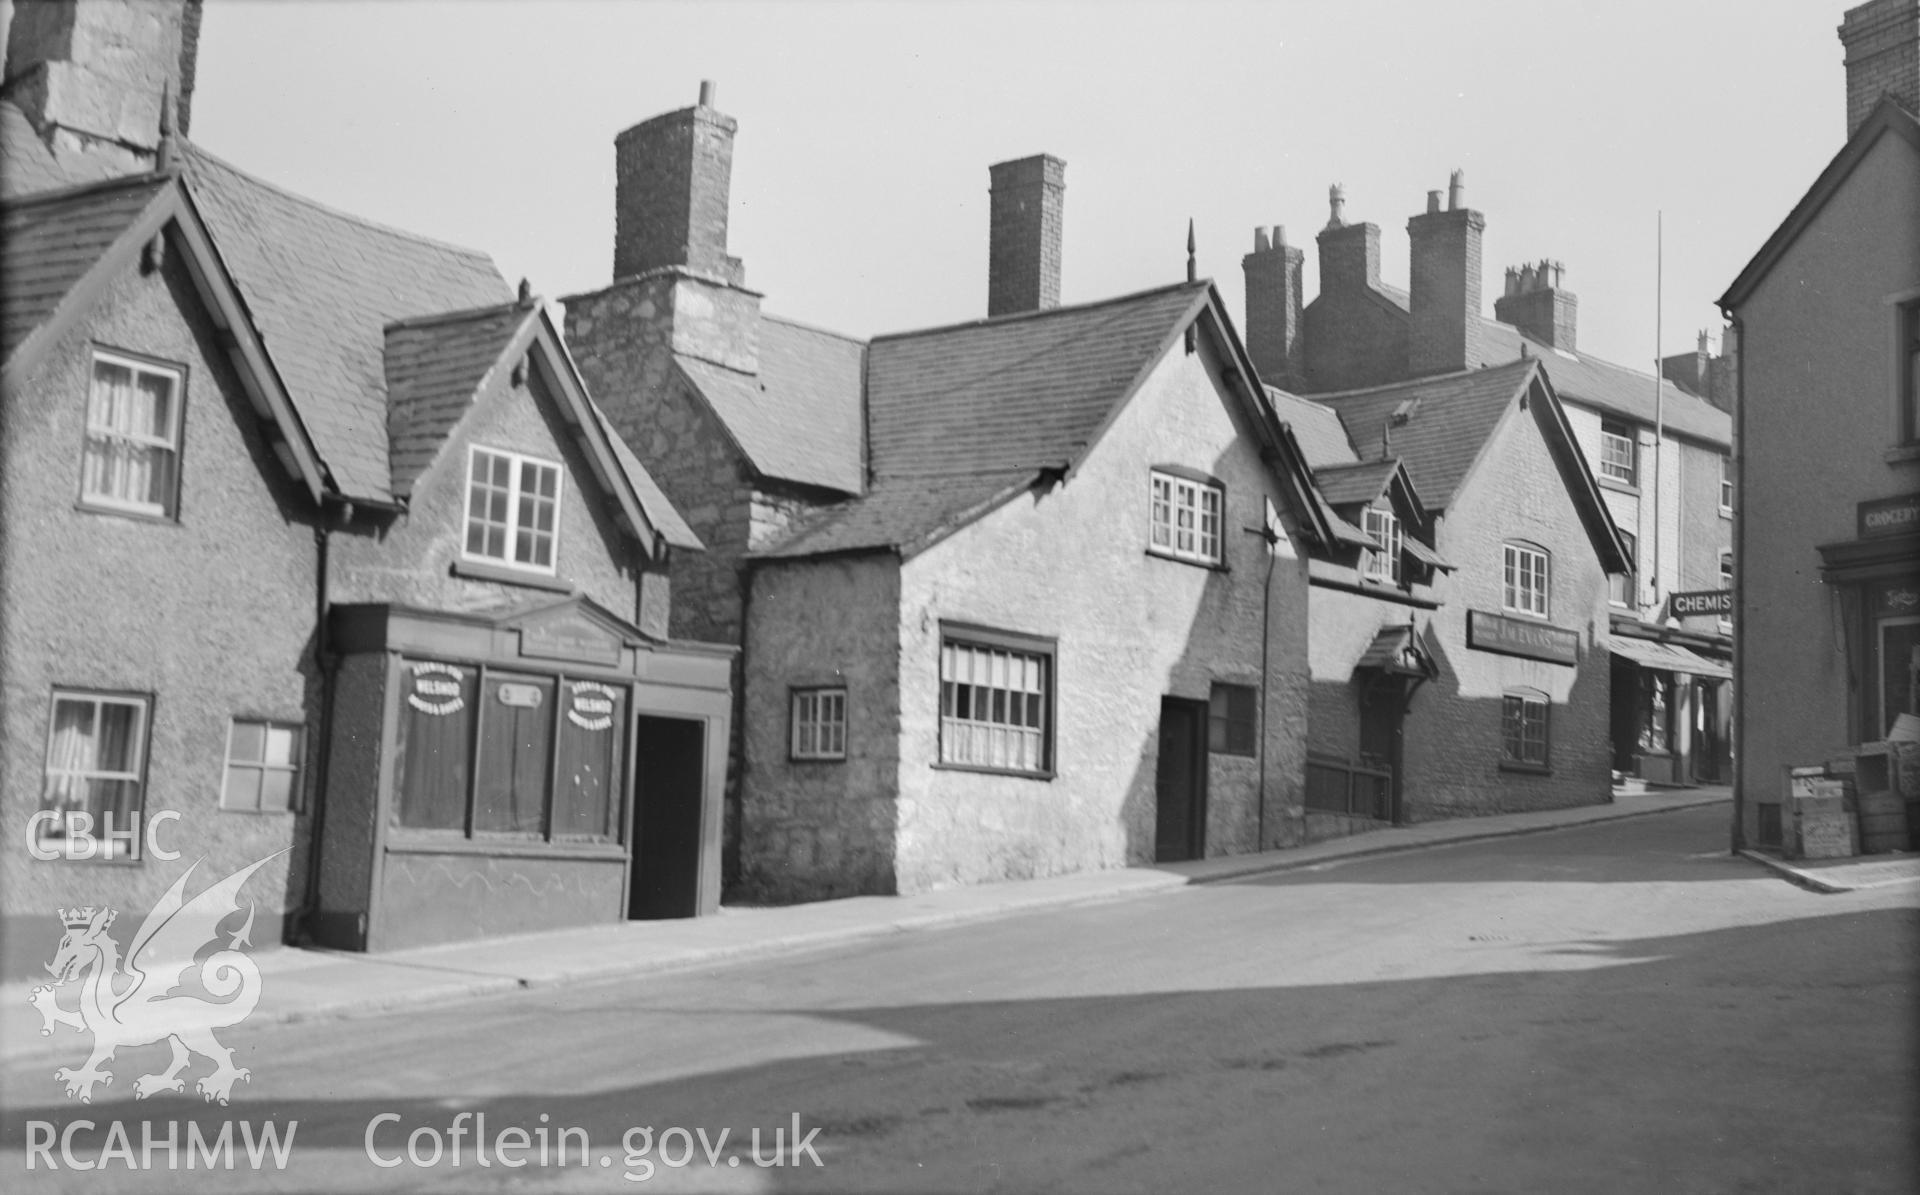 One black and white photograph of nos 20-26, Clwyd Street, Ruthin.